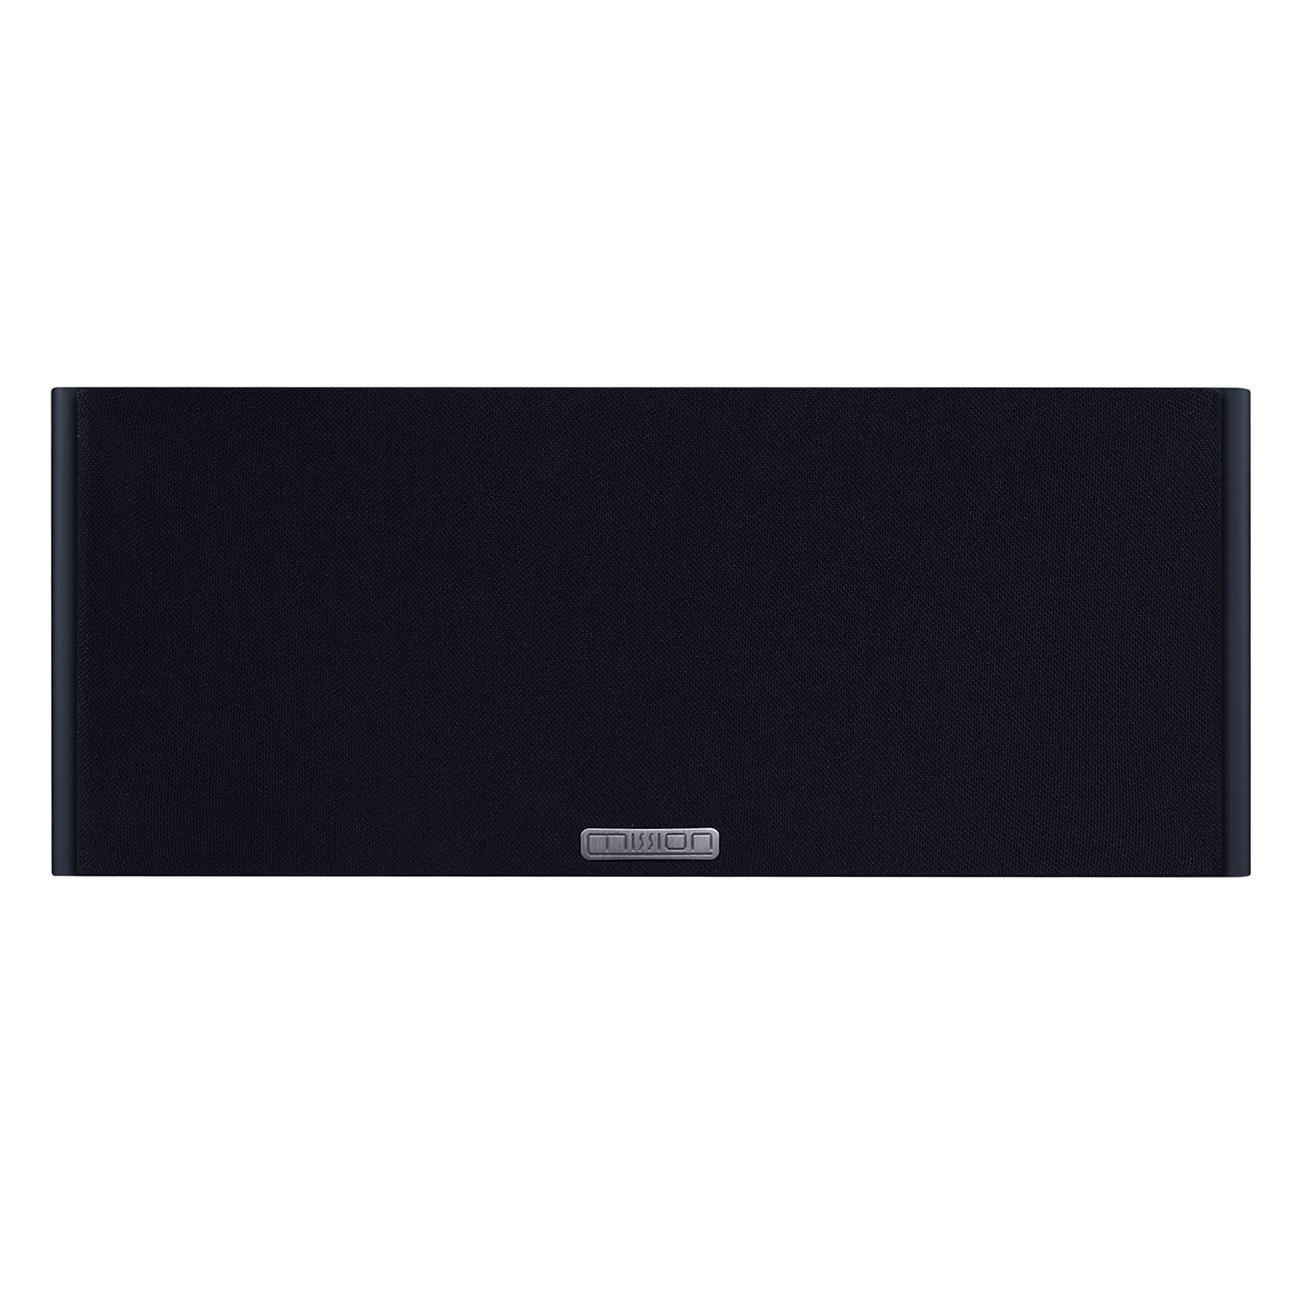 Mission LXC2MKIIBK Two-Way 2x5-Inch Centre Channel Speaker BLACK - Click Image to Close